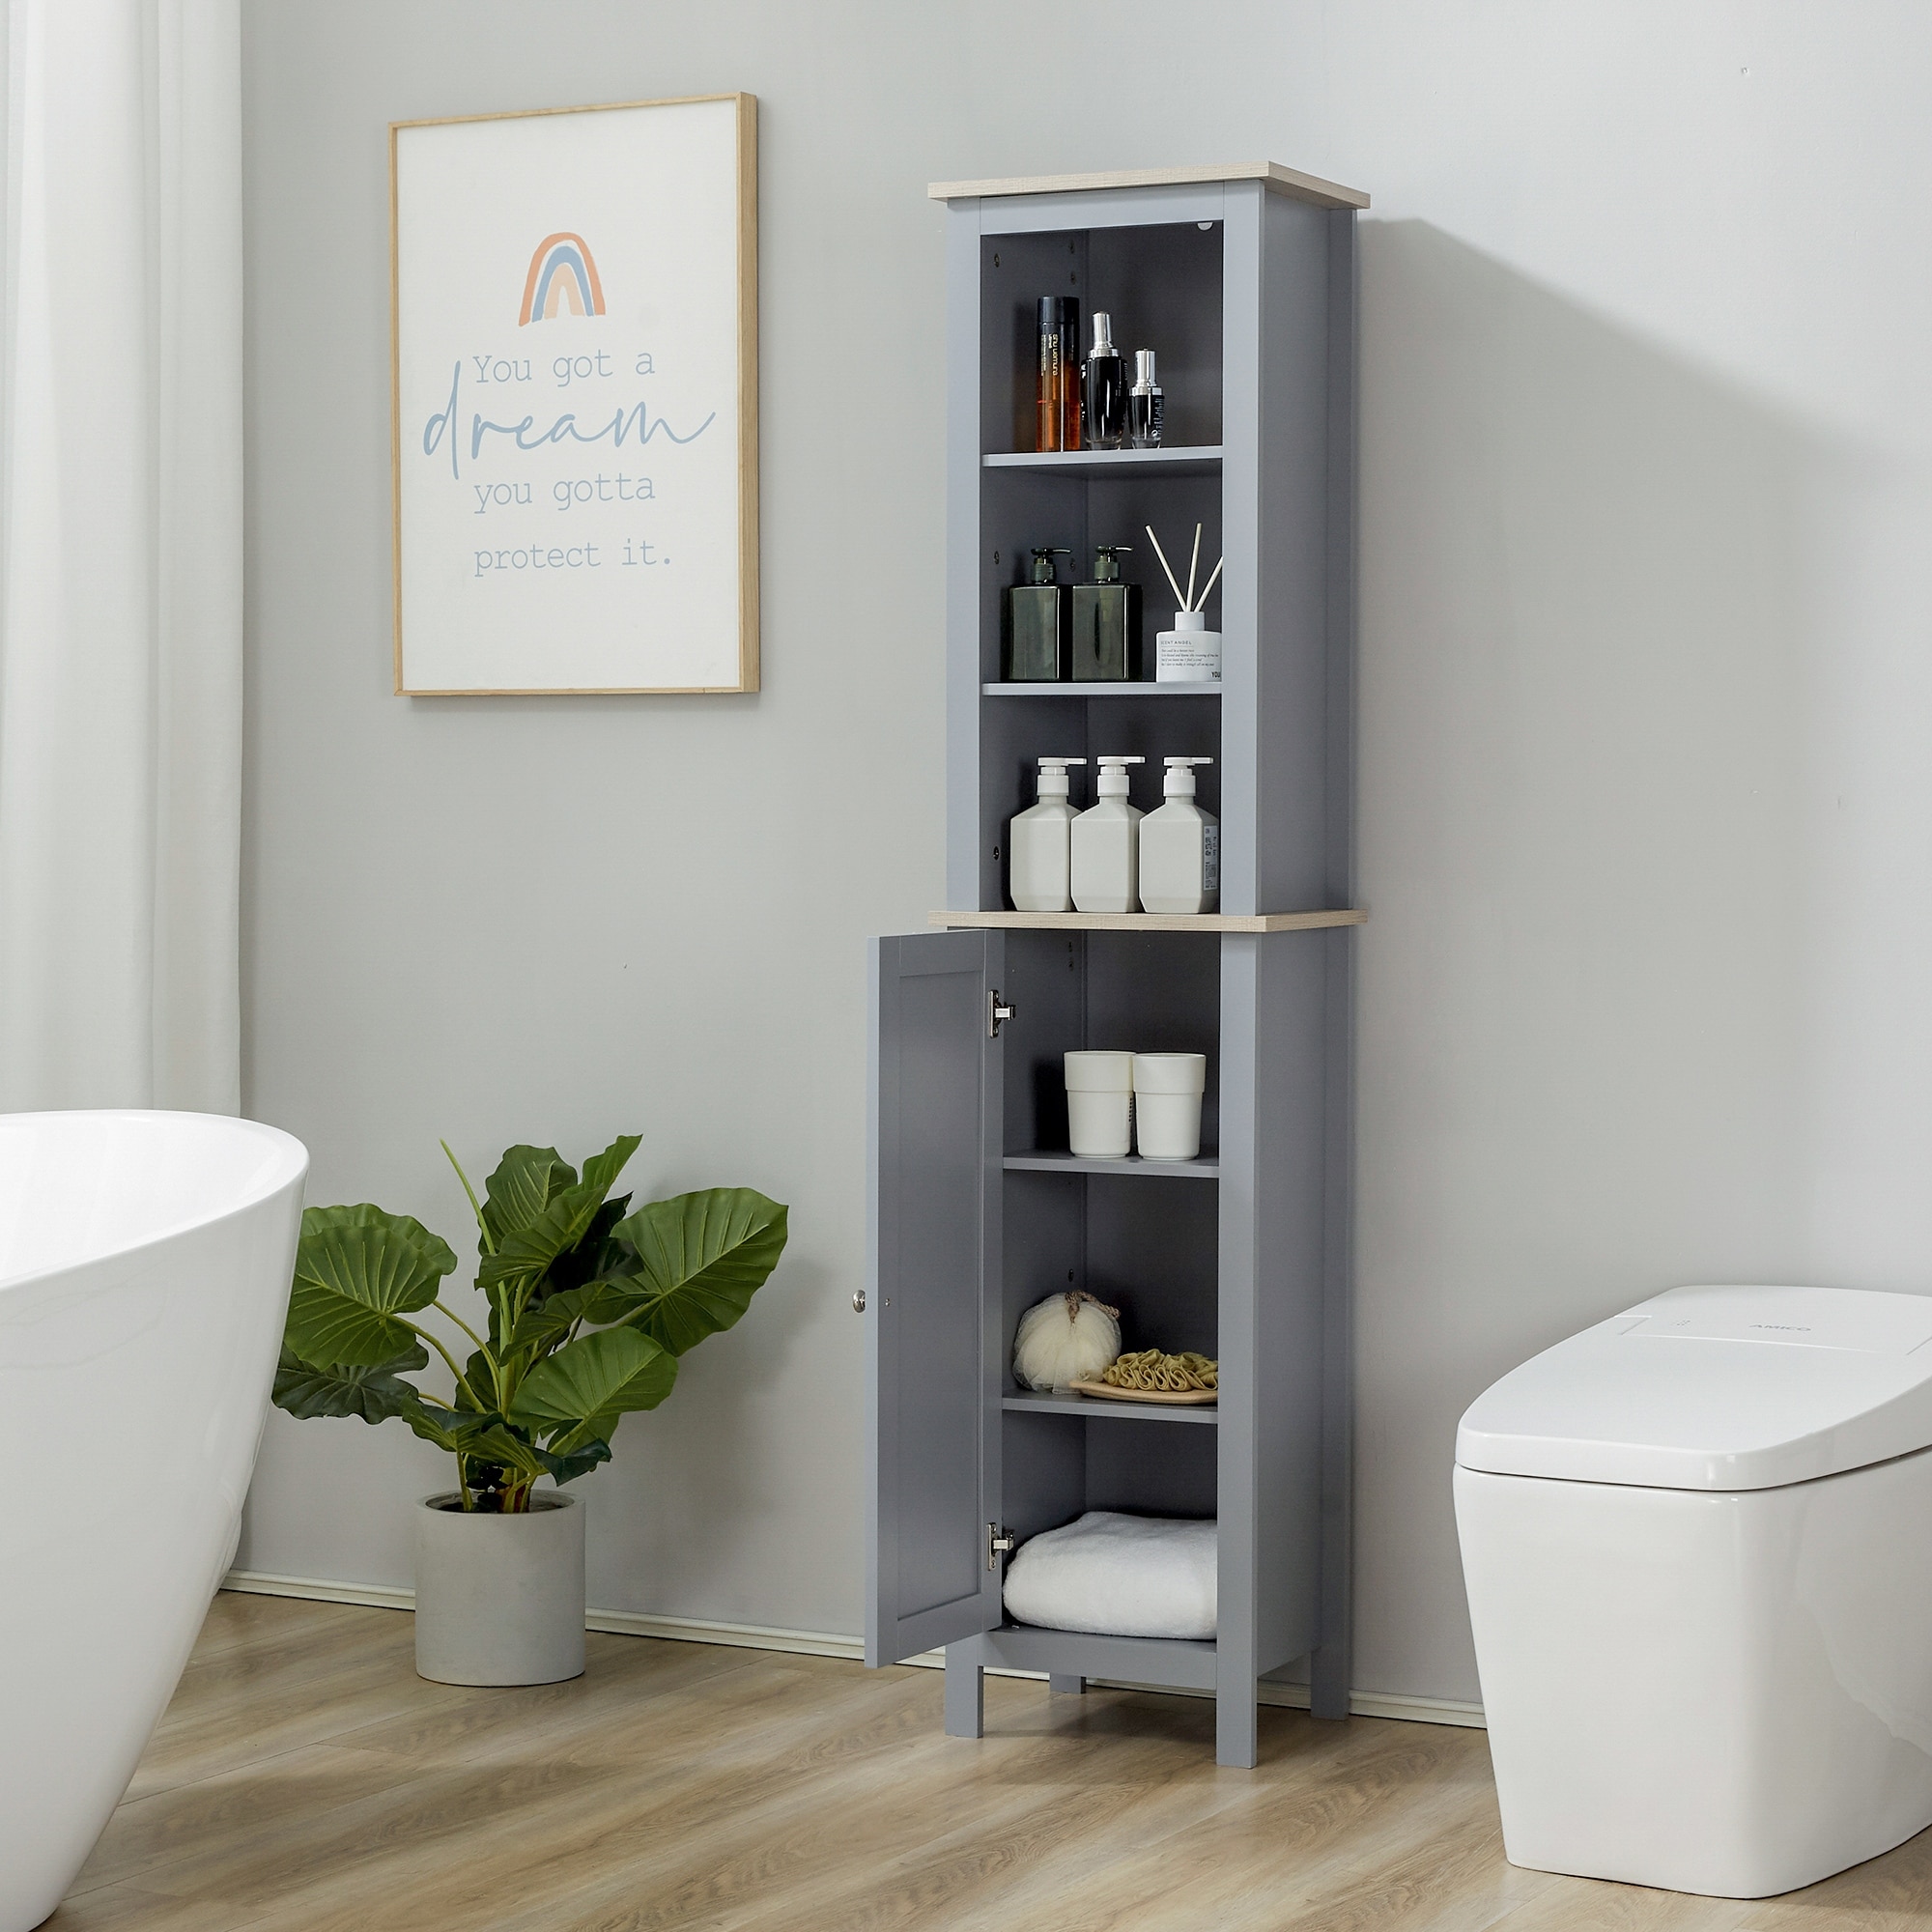 https://ak1.ostkcdn.com/images/products/is/images/direct/596b3e62e5a4502c6f63fd2160712ed0b866181c/kleankin-Bathroom-Floor-Storage-Cabinet-with-3-Tier-Shelf-and-Cupboard-with-Door%2C-Tall-Slim-Side-Organizer-Shelves%2C-Grey.jpg